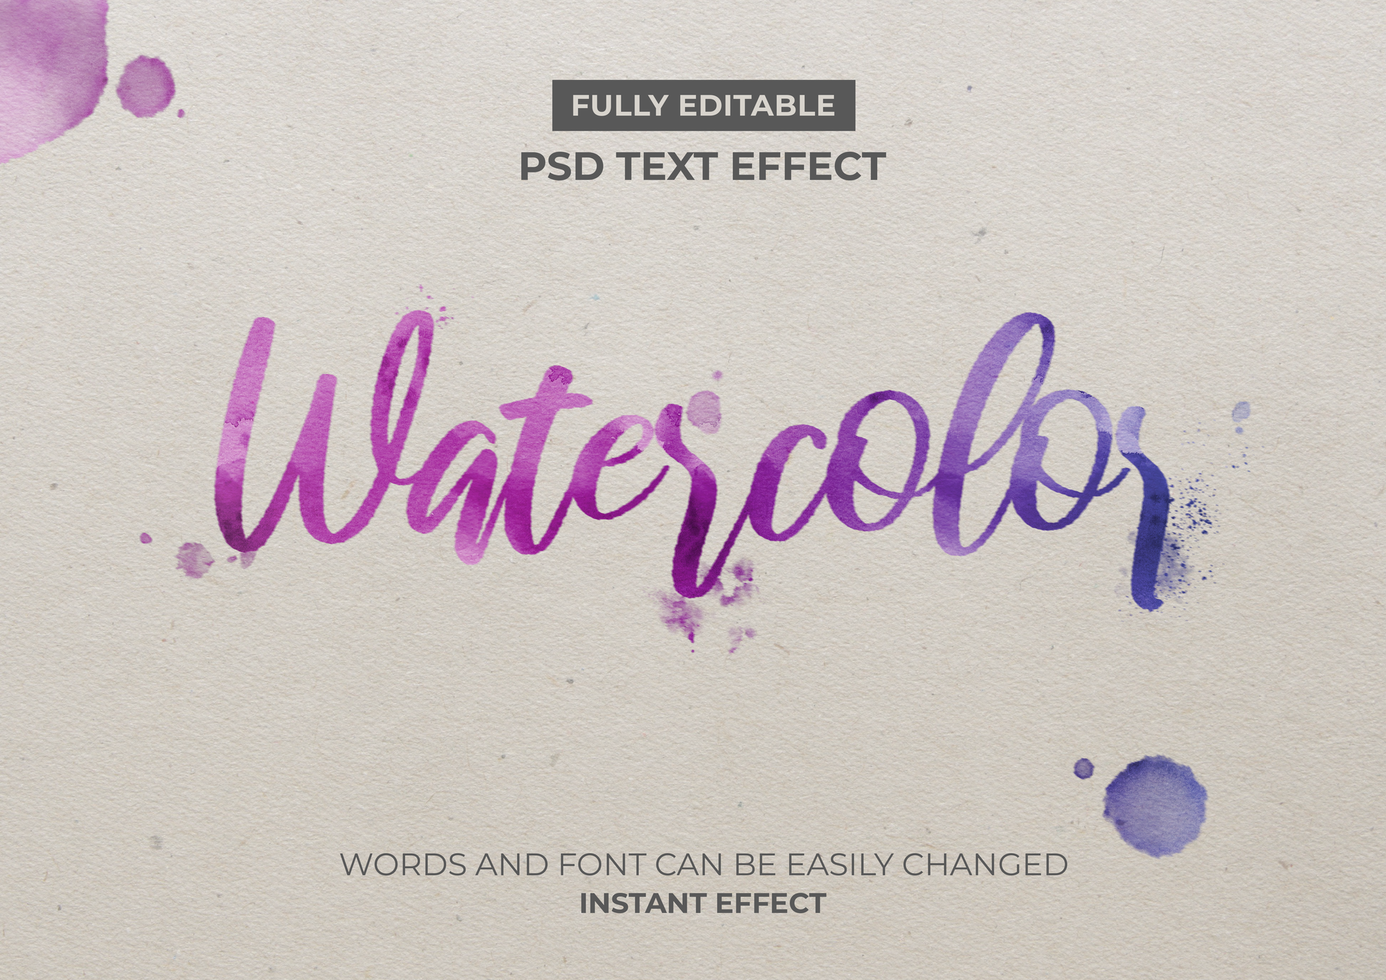 Watercolor Text Effect psd